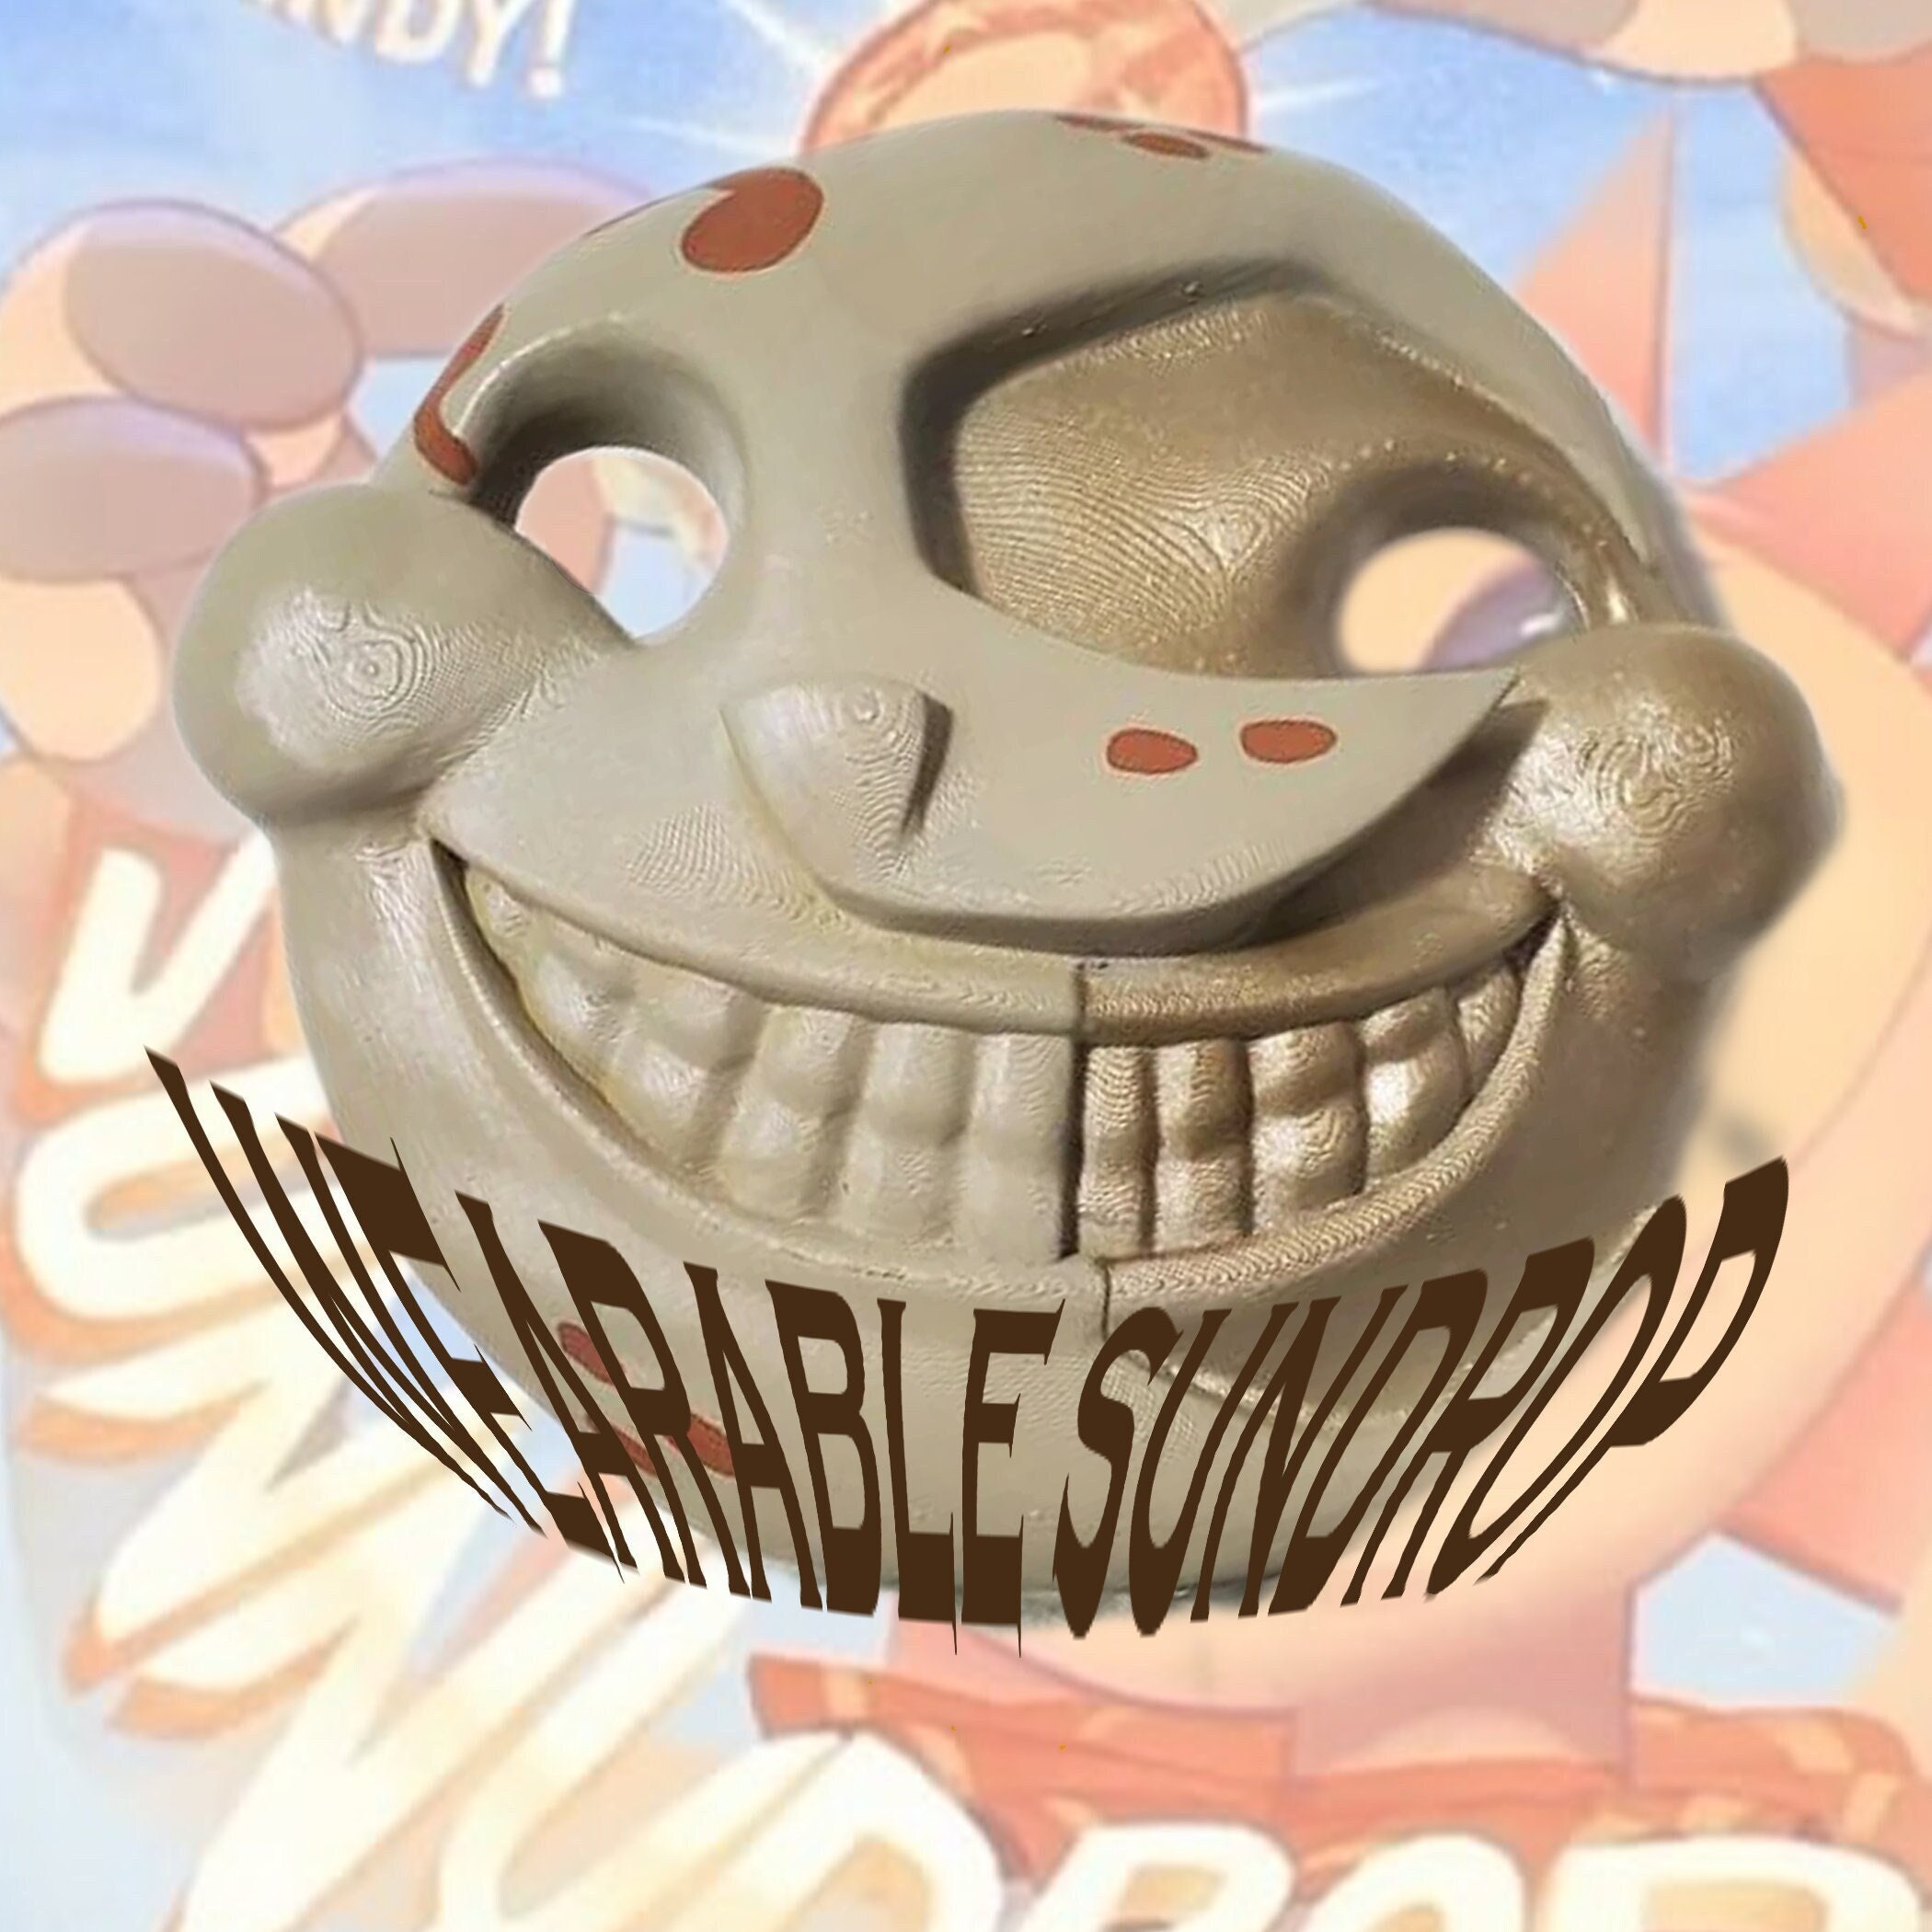 Five Nights at Freddy's: Gregory Child Mask 